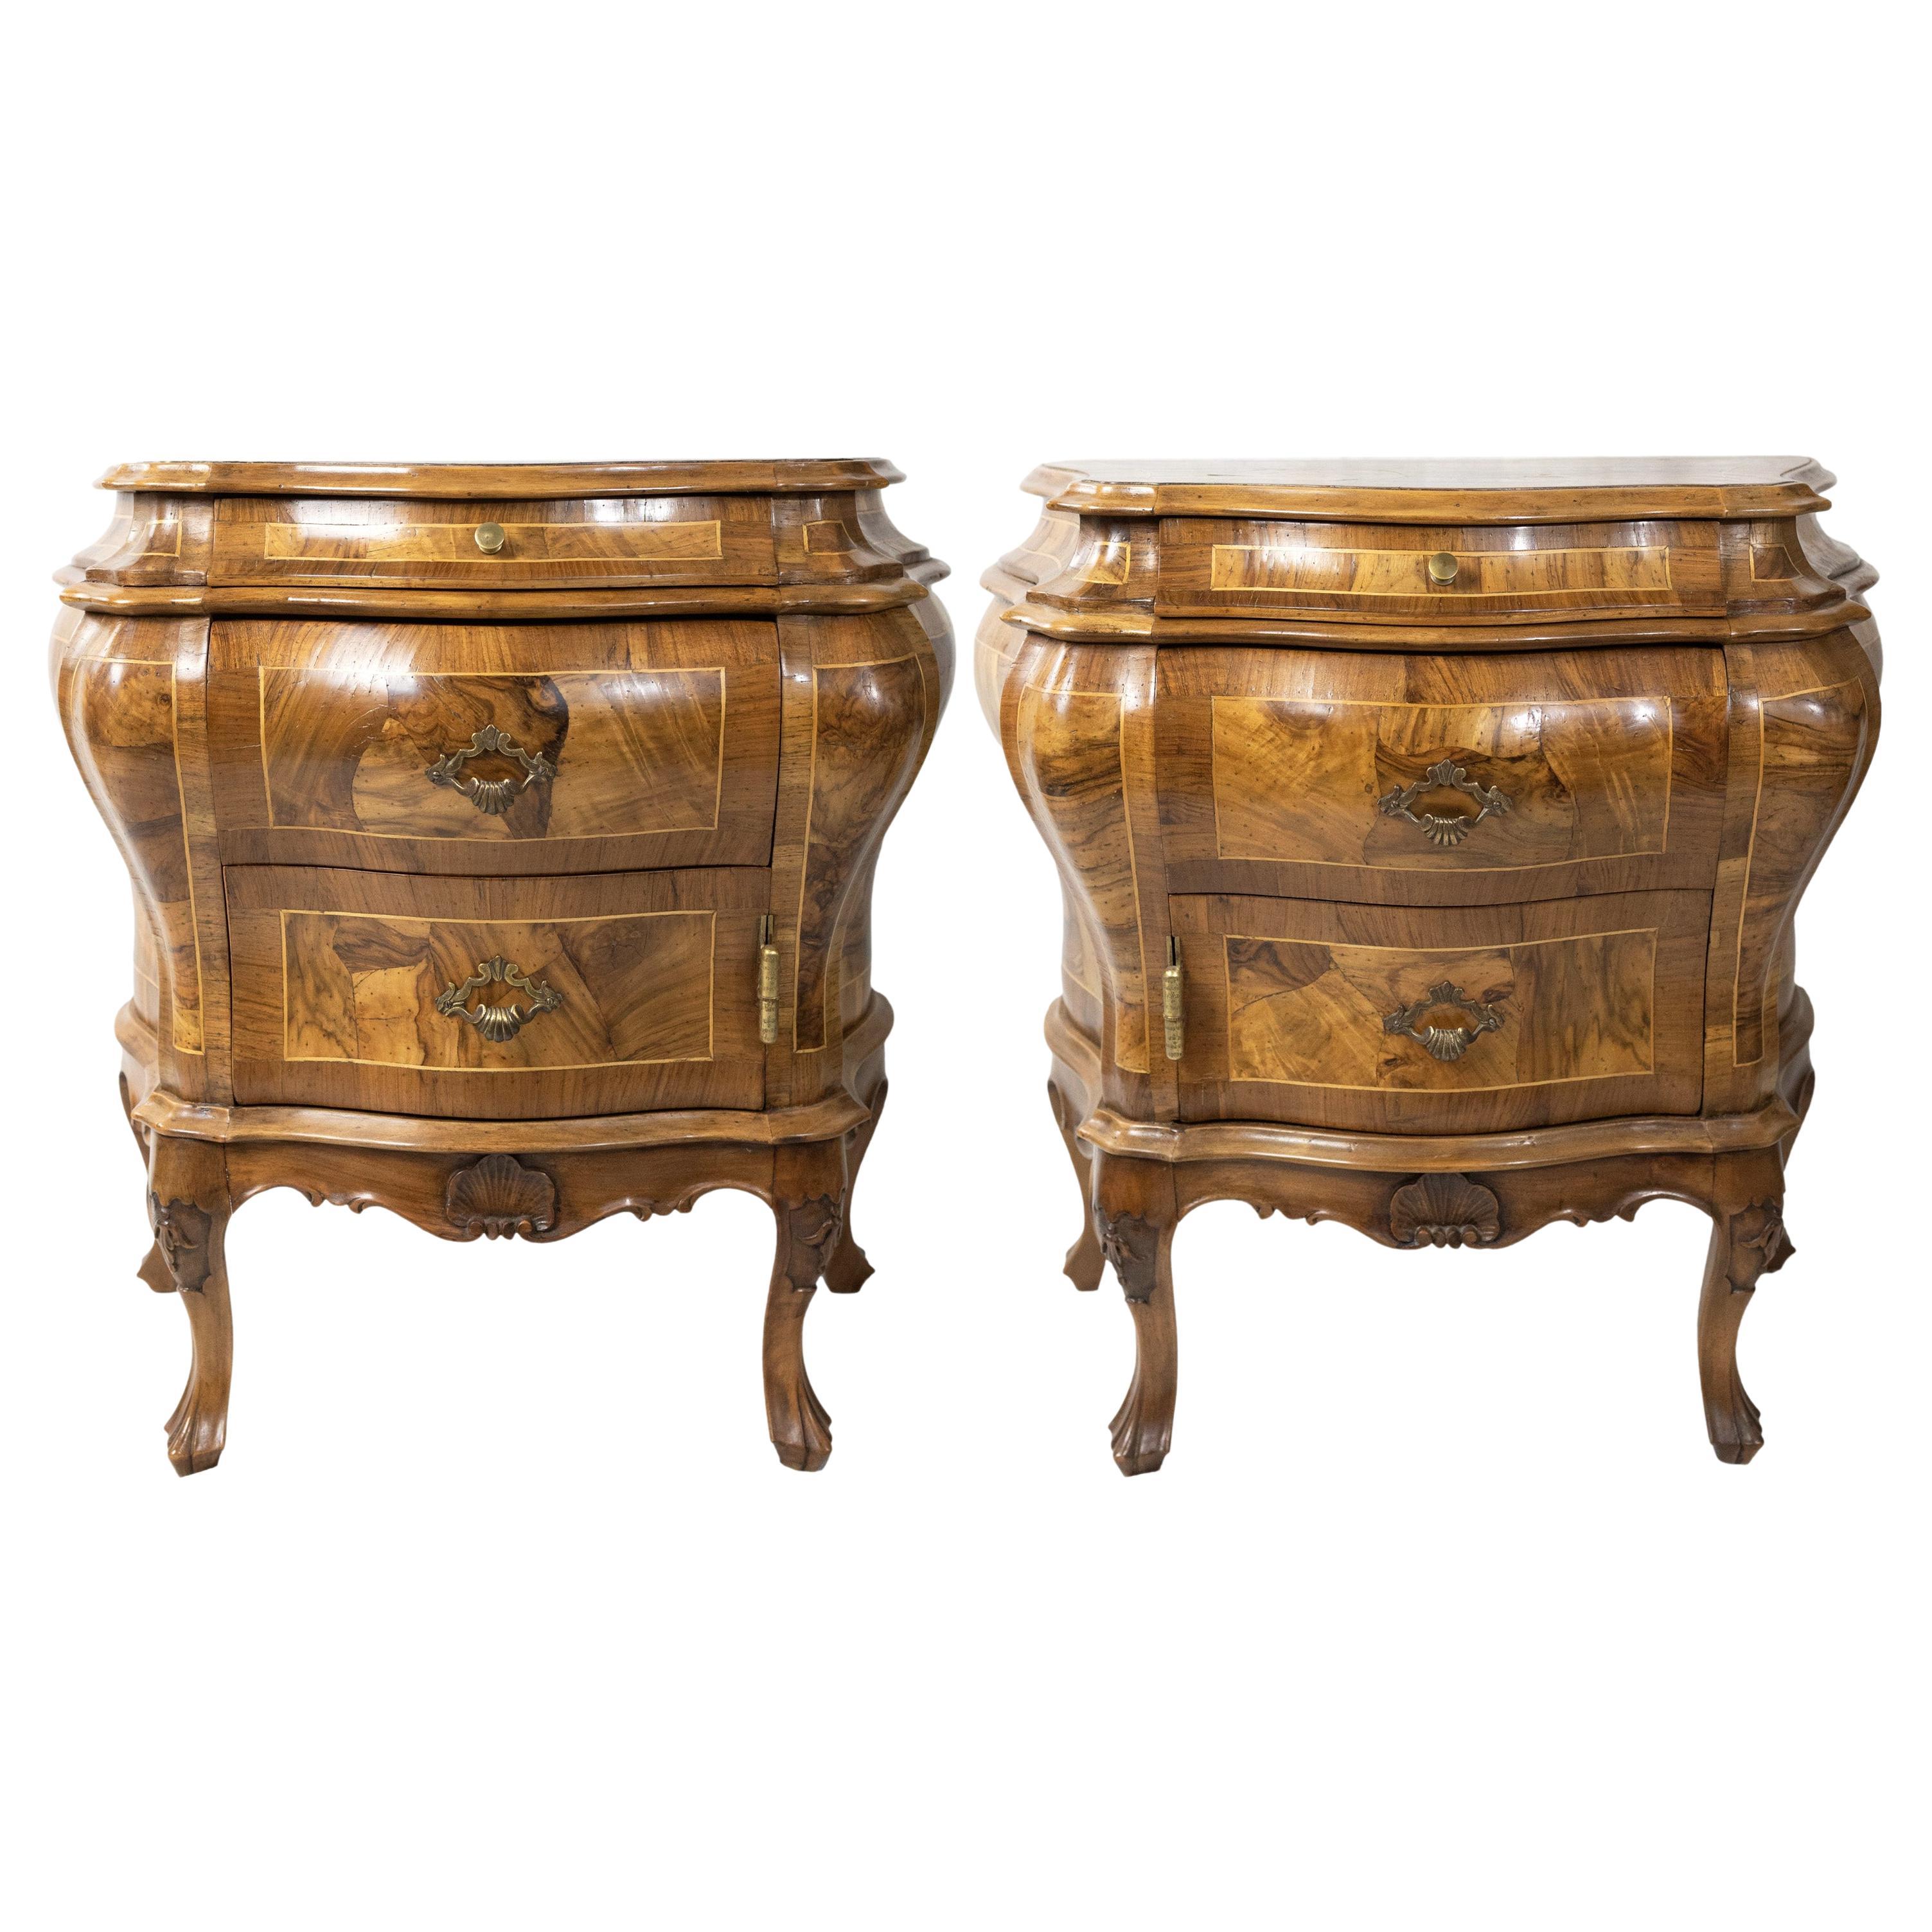 Pair of Olive Wood Bombé Commodes/Side Cabinets, Italian, ca. 1880